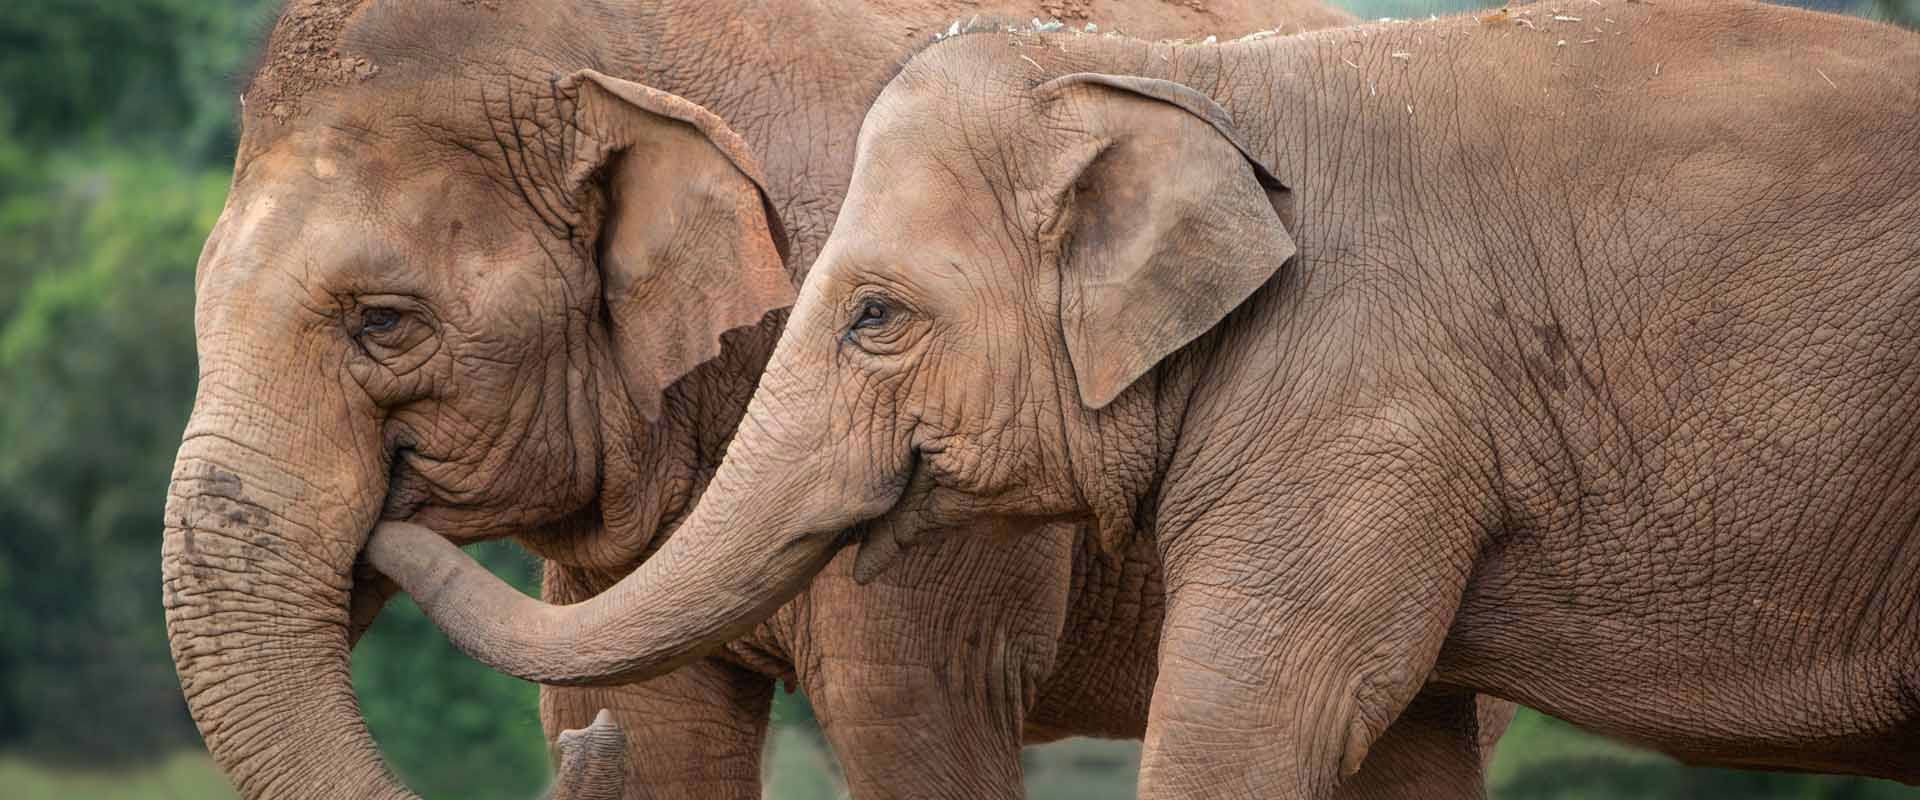 News & Updates from Elephant Nature Park